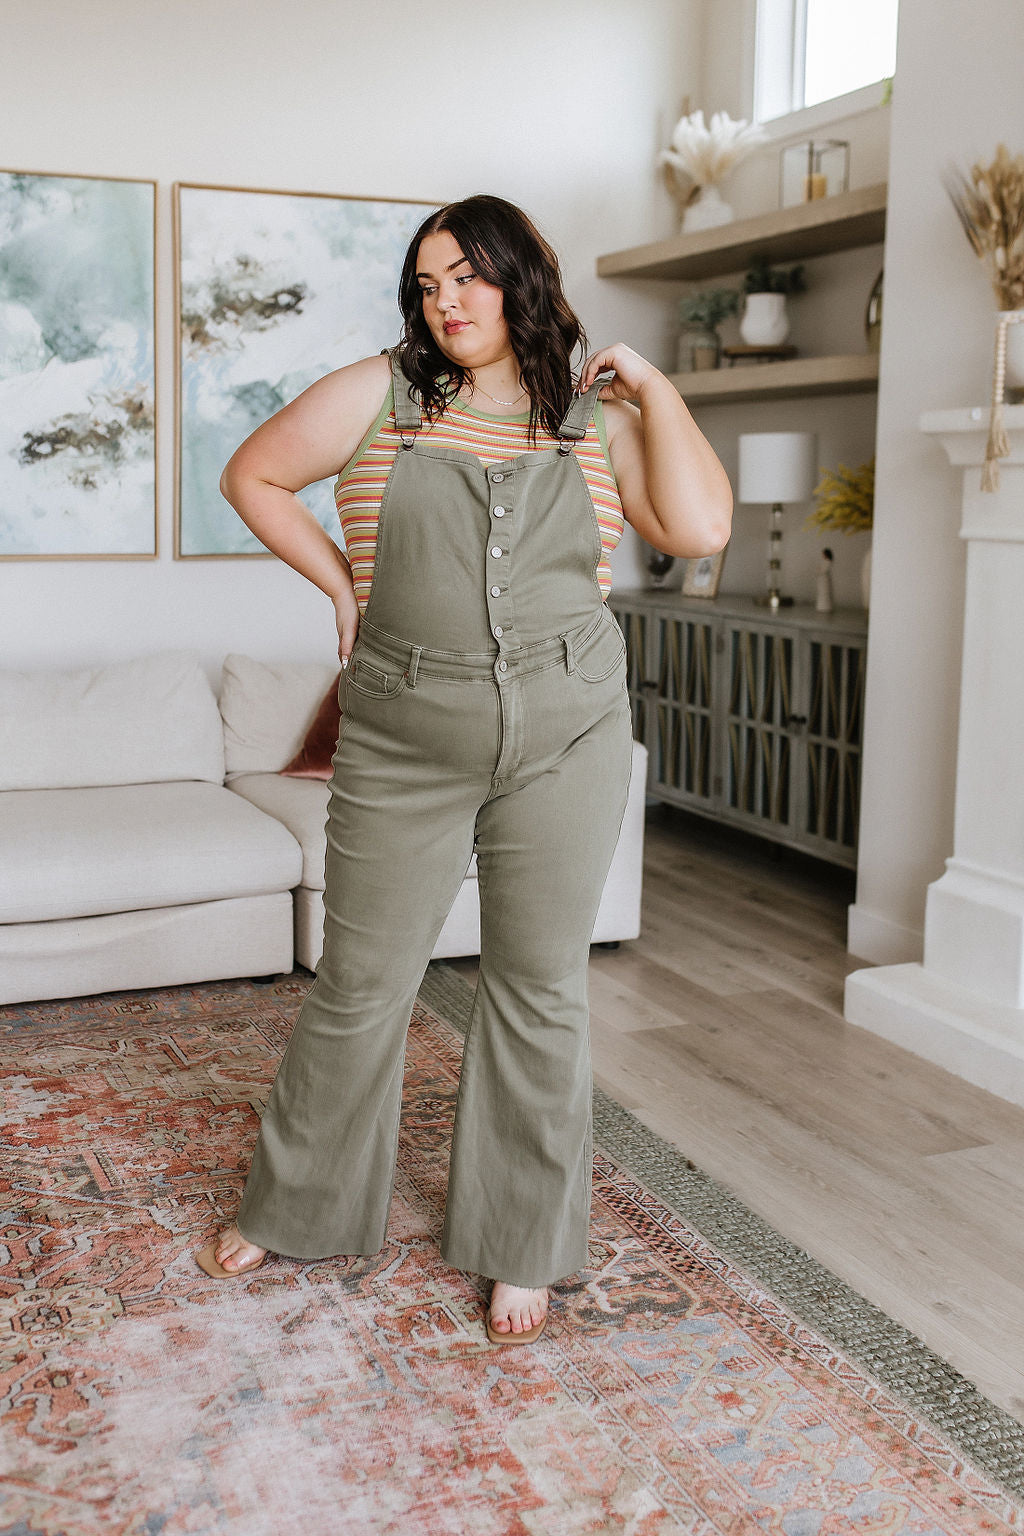 Boise Control Top Release Hem Overalls in Olive